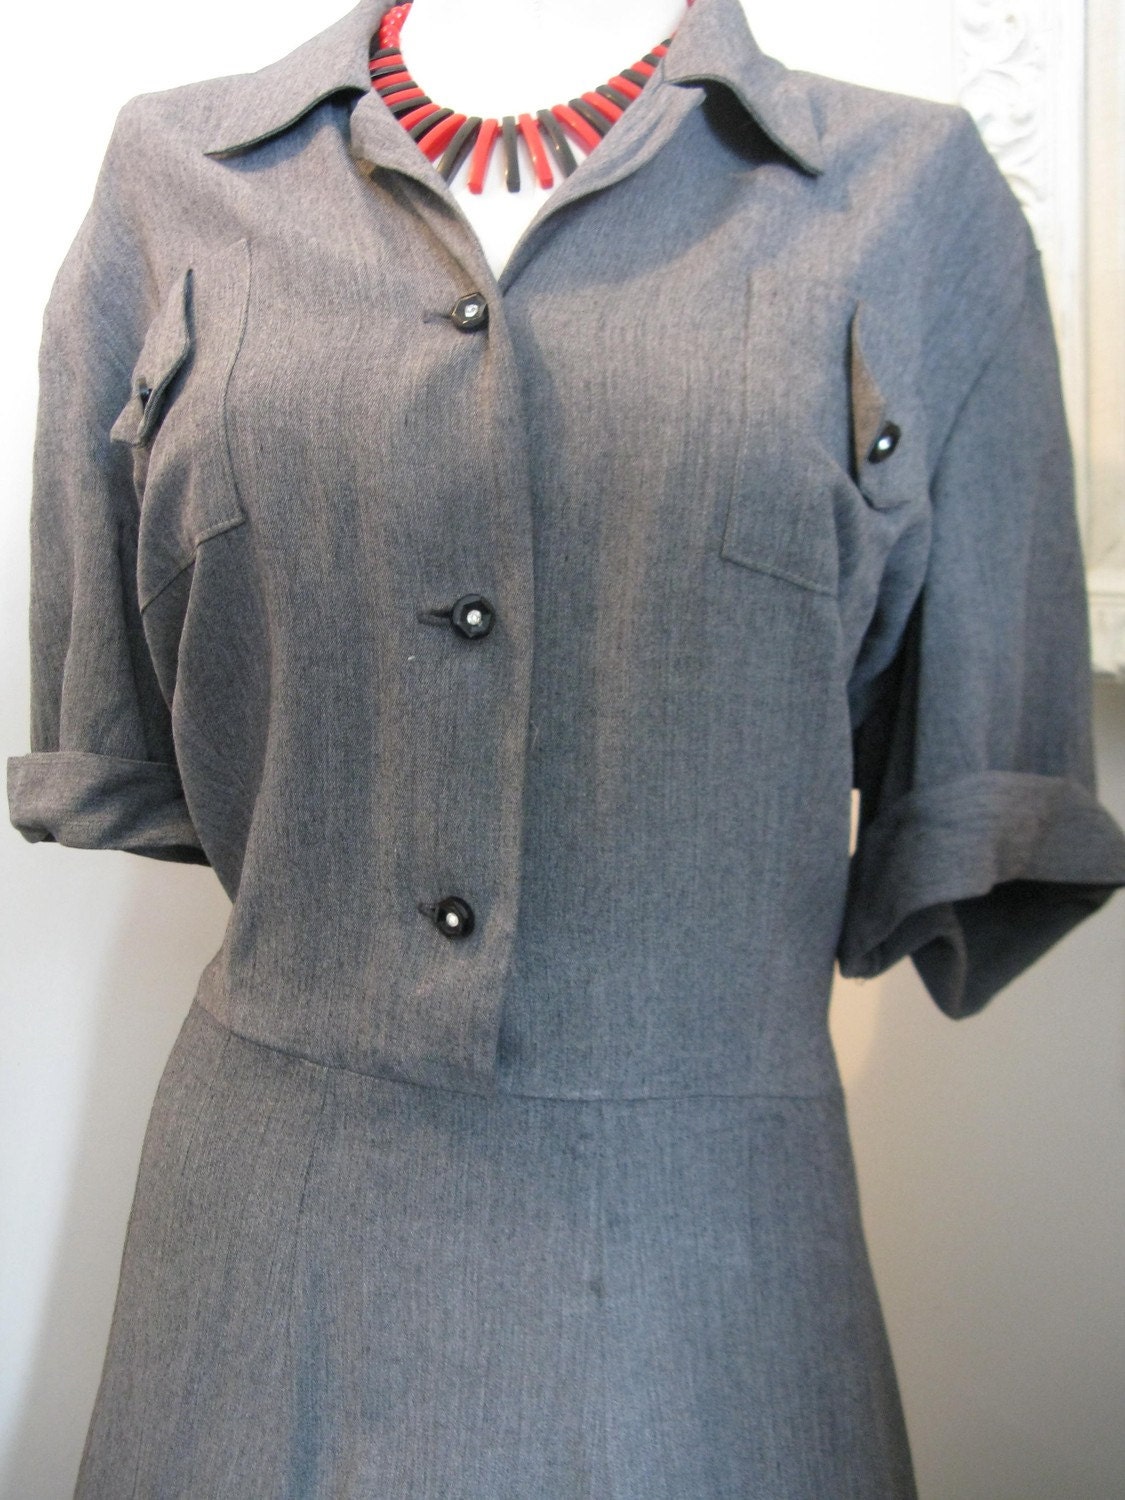 Vintage 1940s 40's Forties WW2 Military Inspired by youthstep